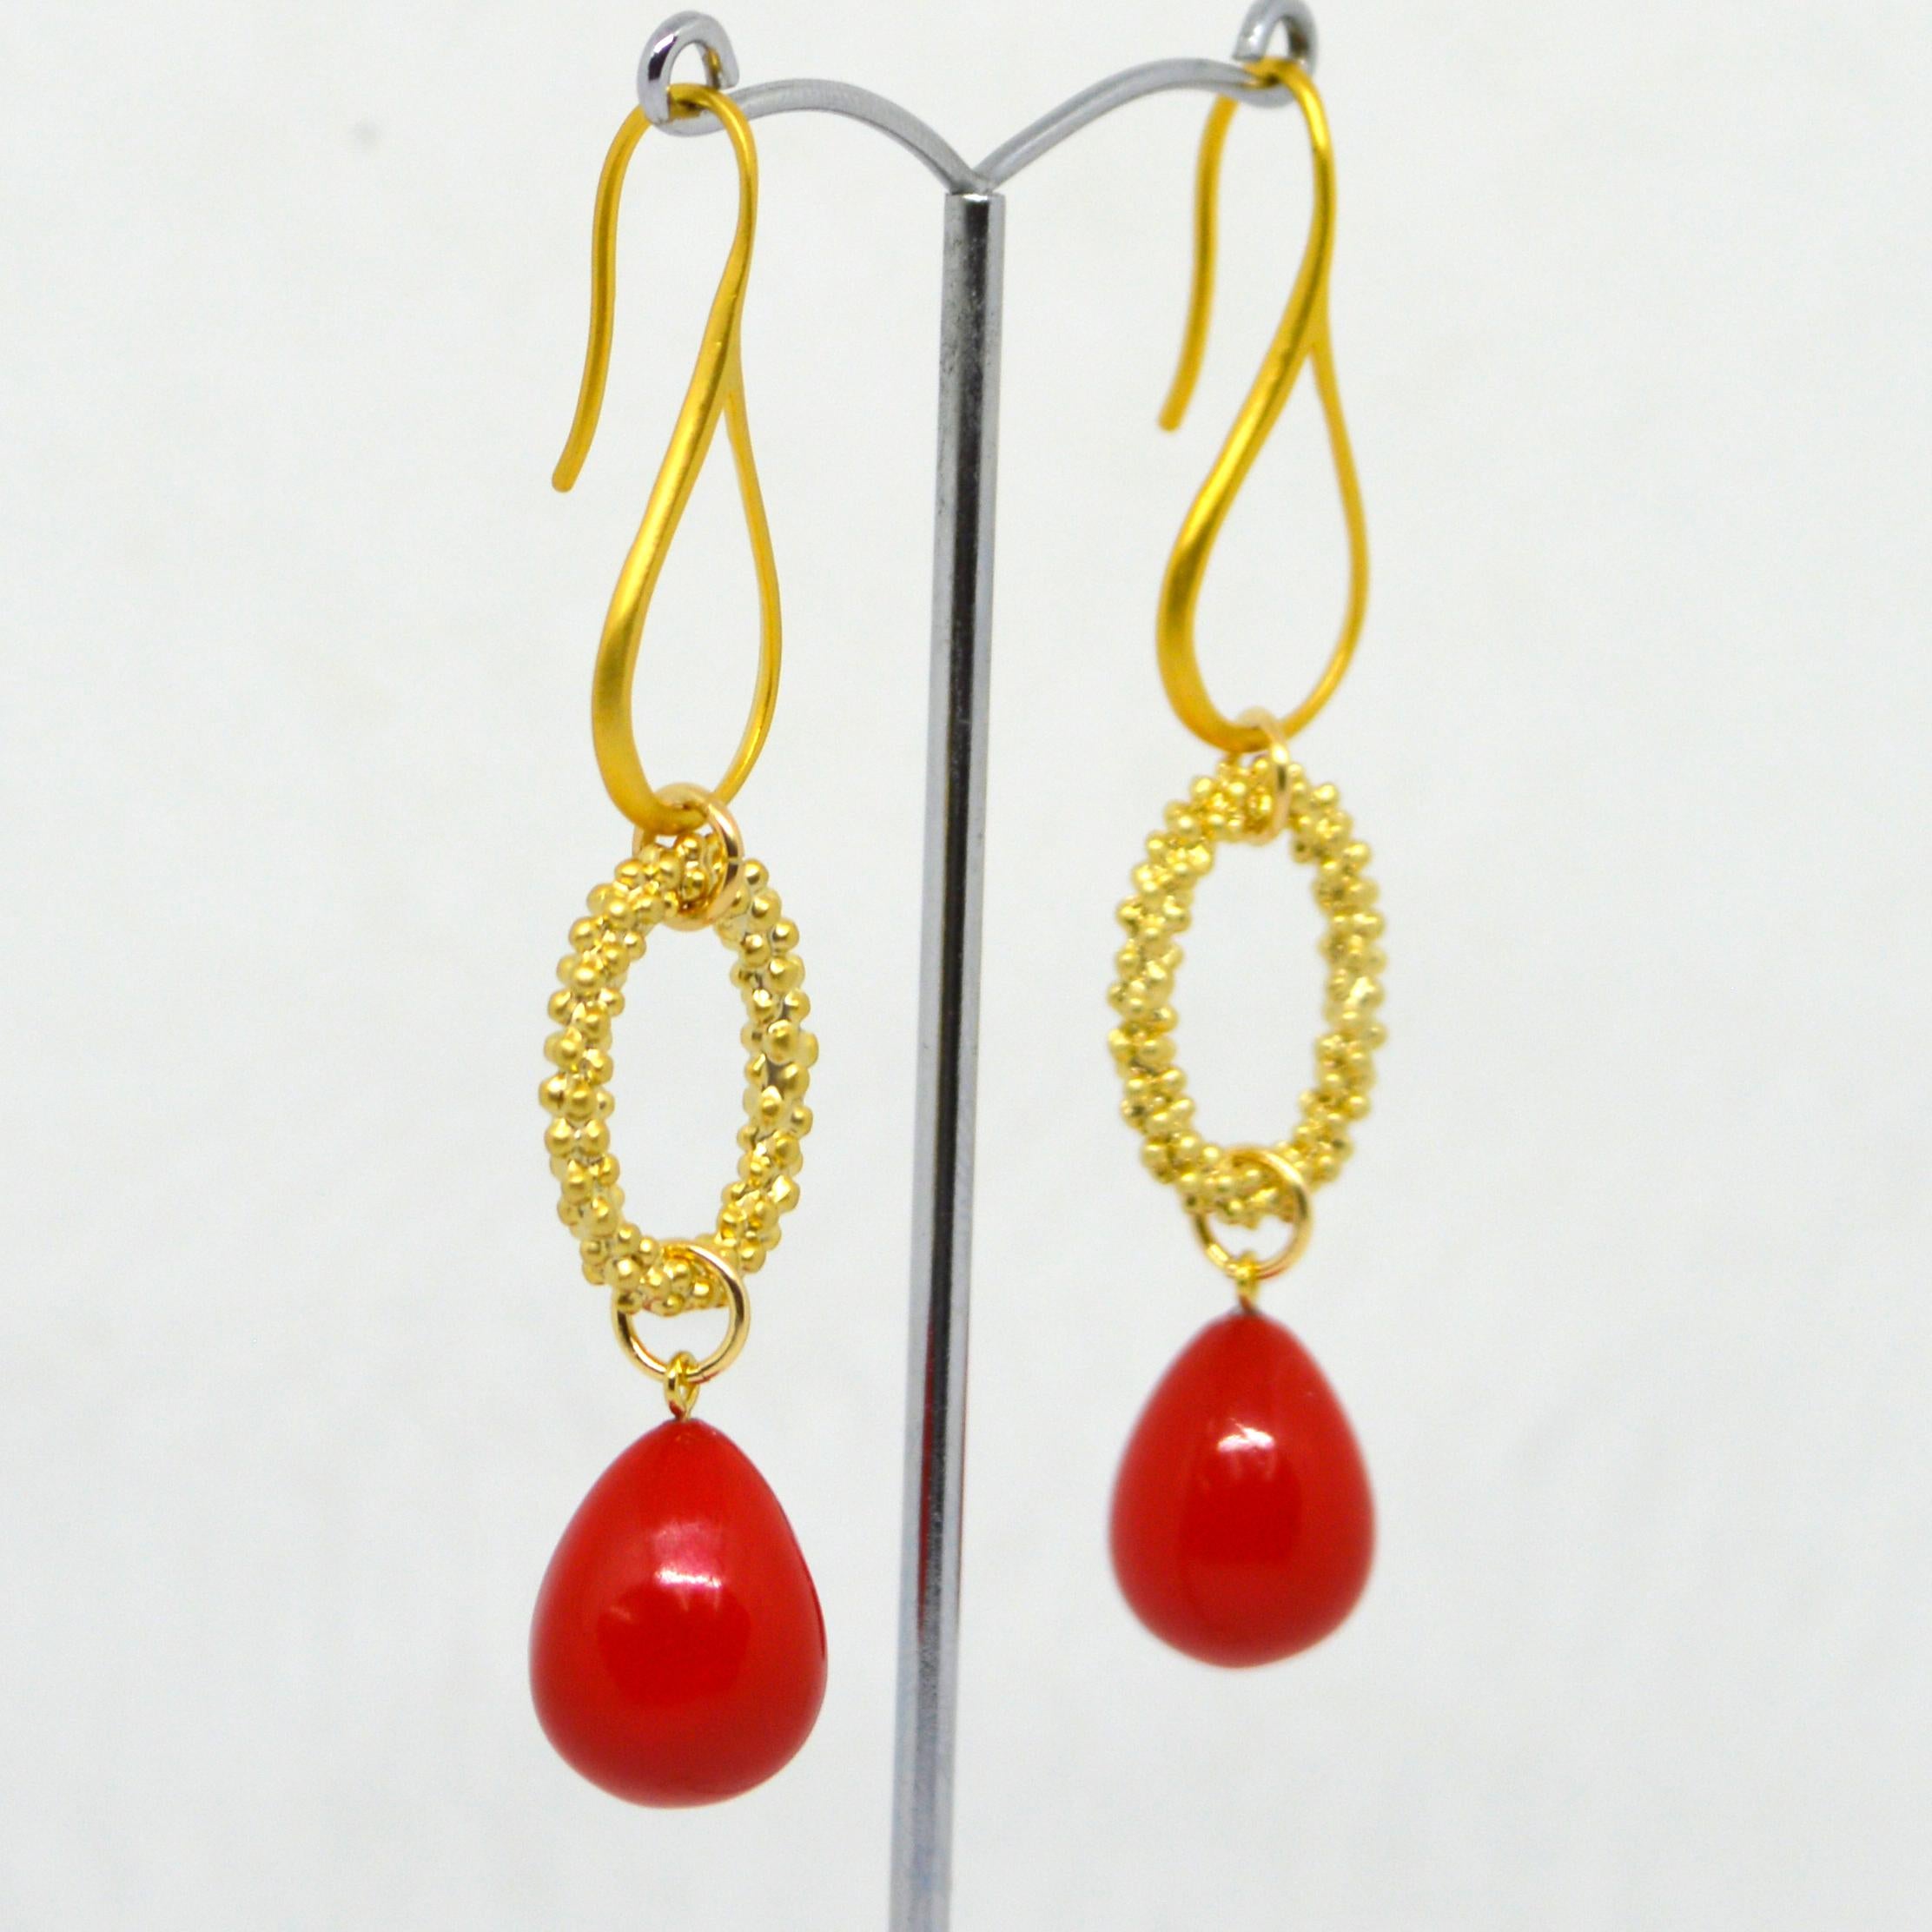 Shell Based Pearl Red Briolette Gold Brass Earrings

Gold Plate Brass Shepherd Hook 28mm
Gold Plated Brass Beaded Matt Oval Connector 15x21mm 
Red Shell Based Briolette 13x16mm                                                                
Total